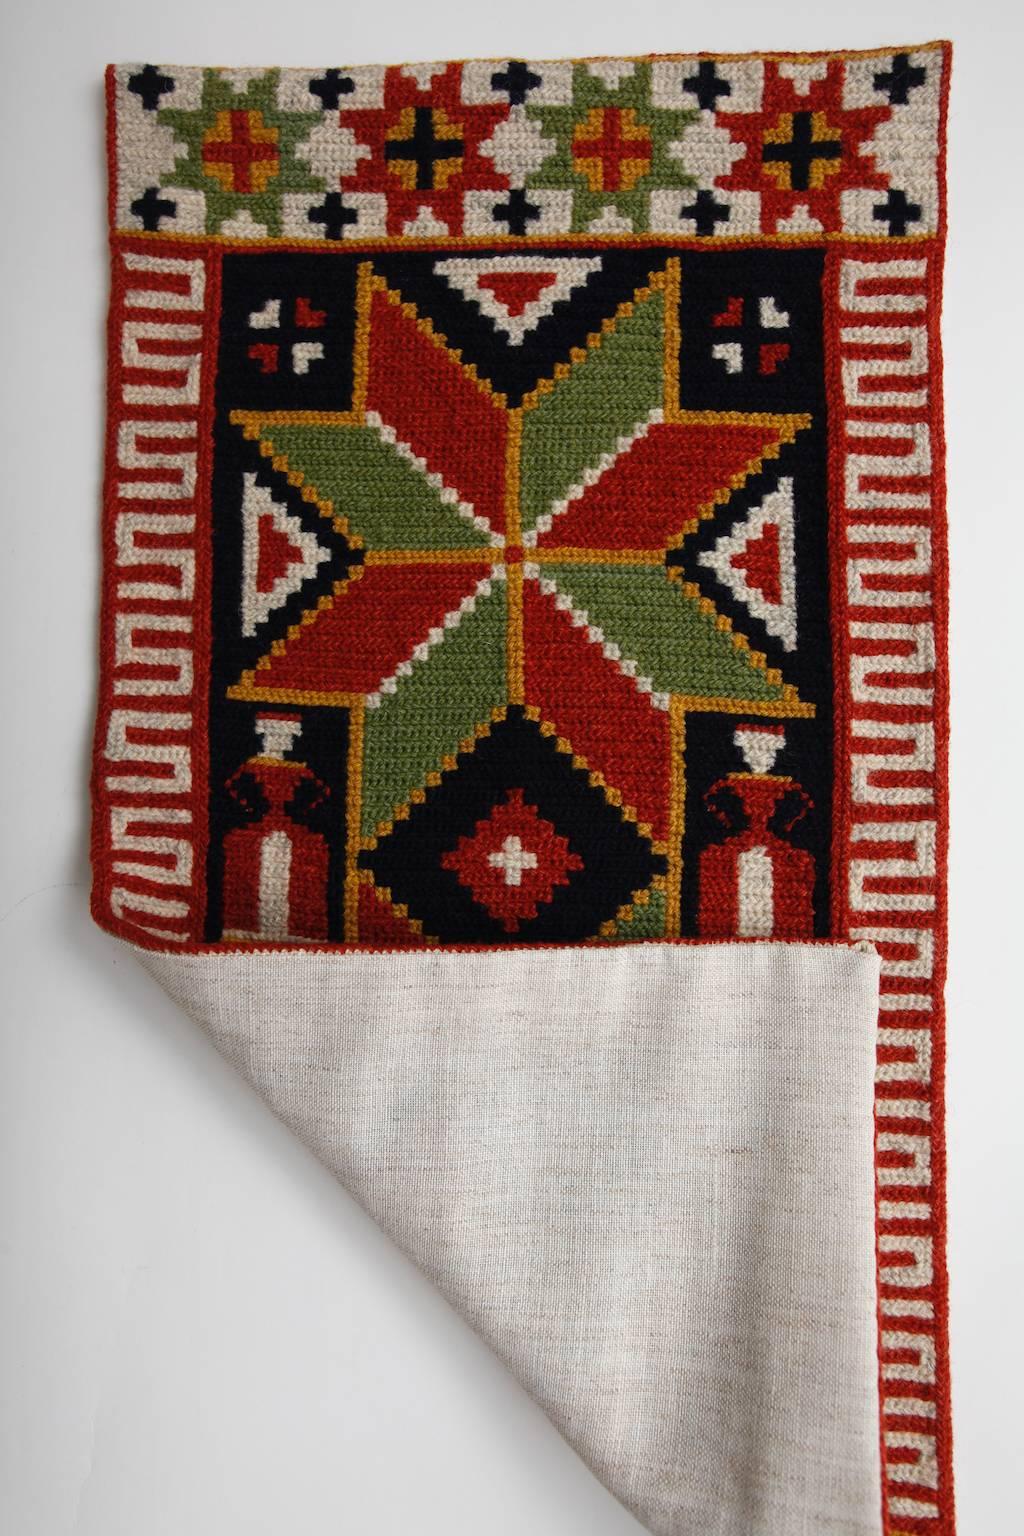 A beautiful handmade Swedish wool and linen "Agedyna" from Ingestads Härad in the province Skåne in south of Sweden probably made in the beginning of the 1900s.
Linded on the back with linen. The main motif on this piece is two stars